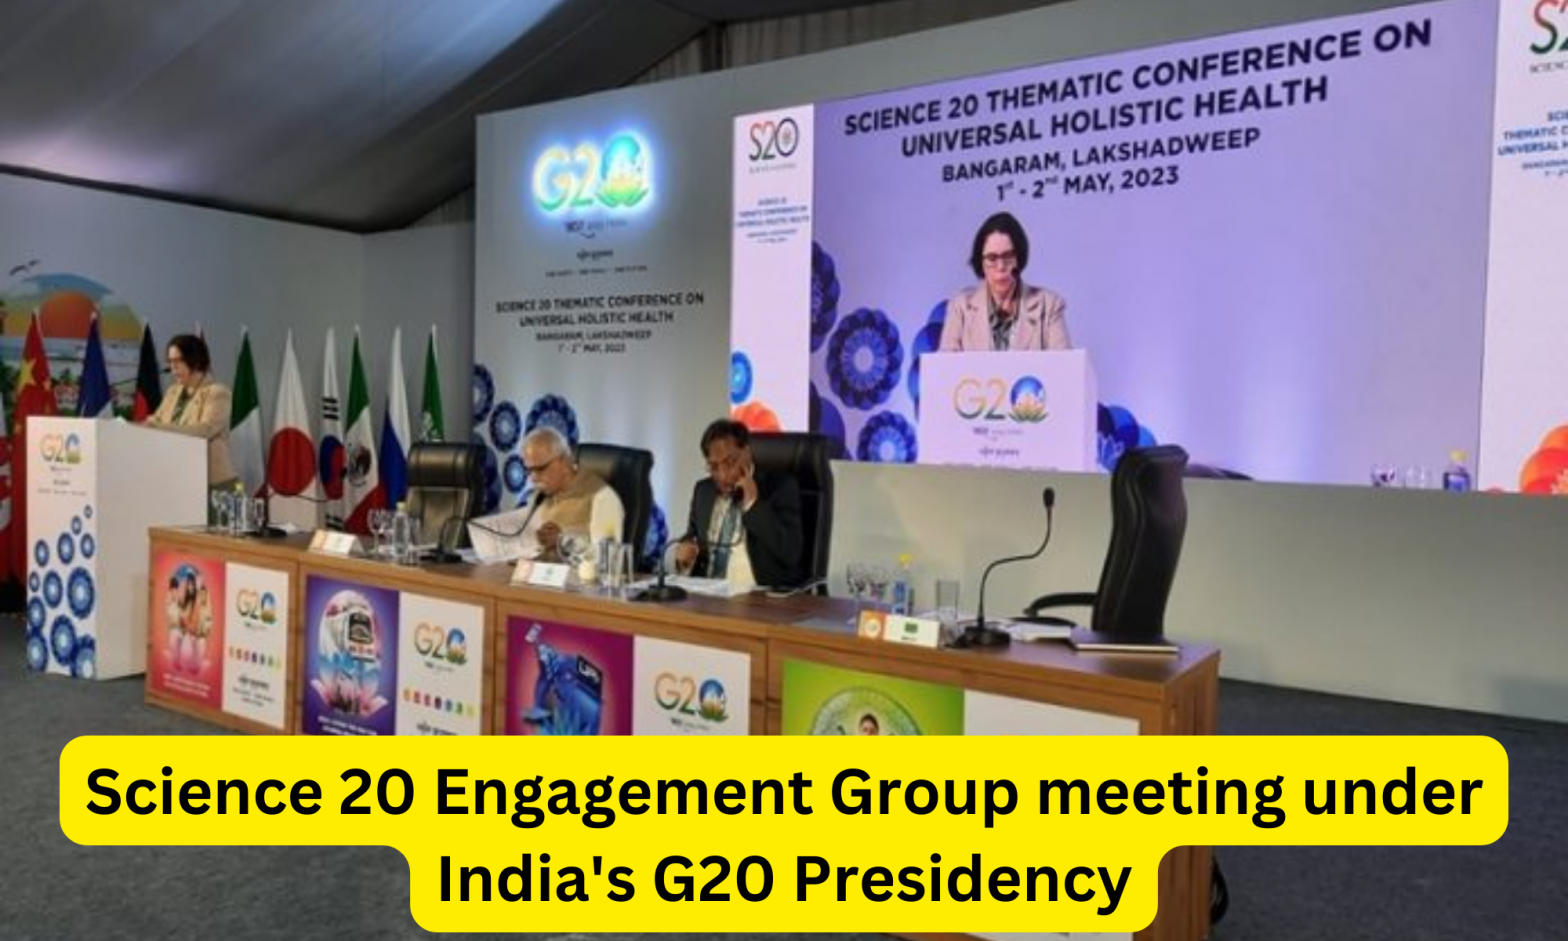 Science 20 Engagement Group meeting under India's G20 Presidency